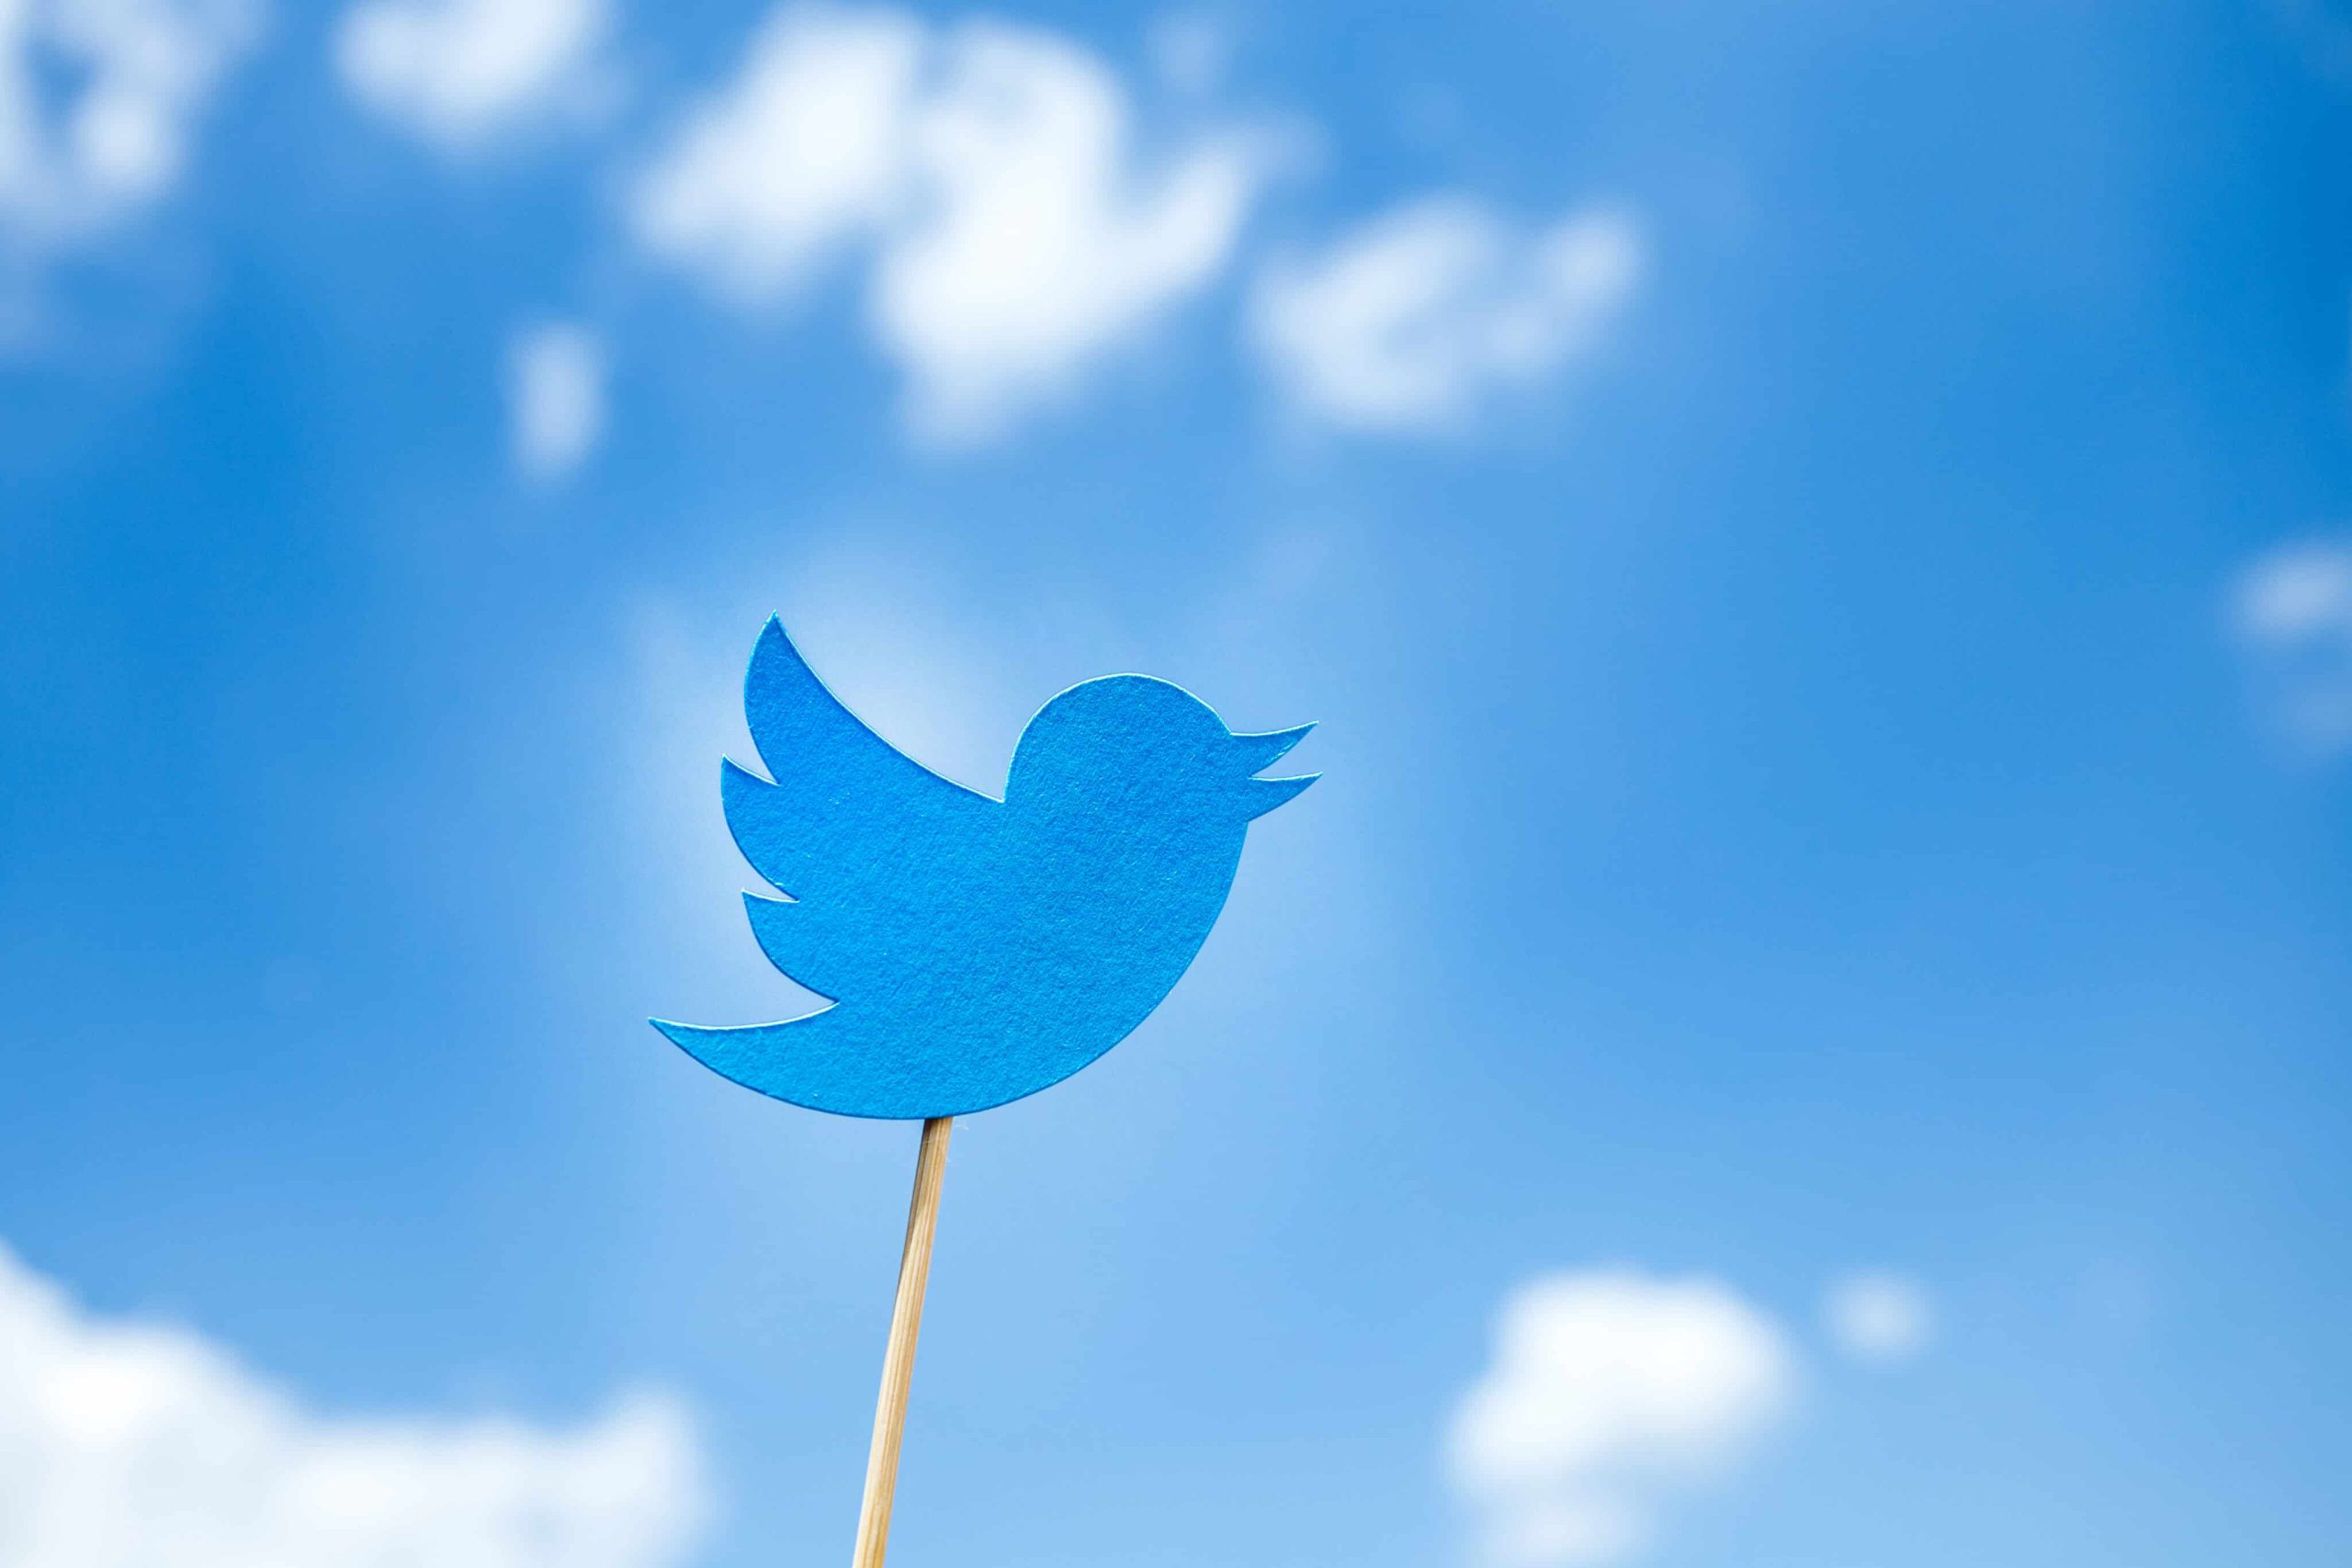 Twitter To Allow THC, CBD, and Related Ads in U.S.